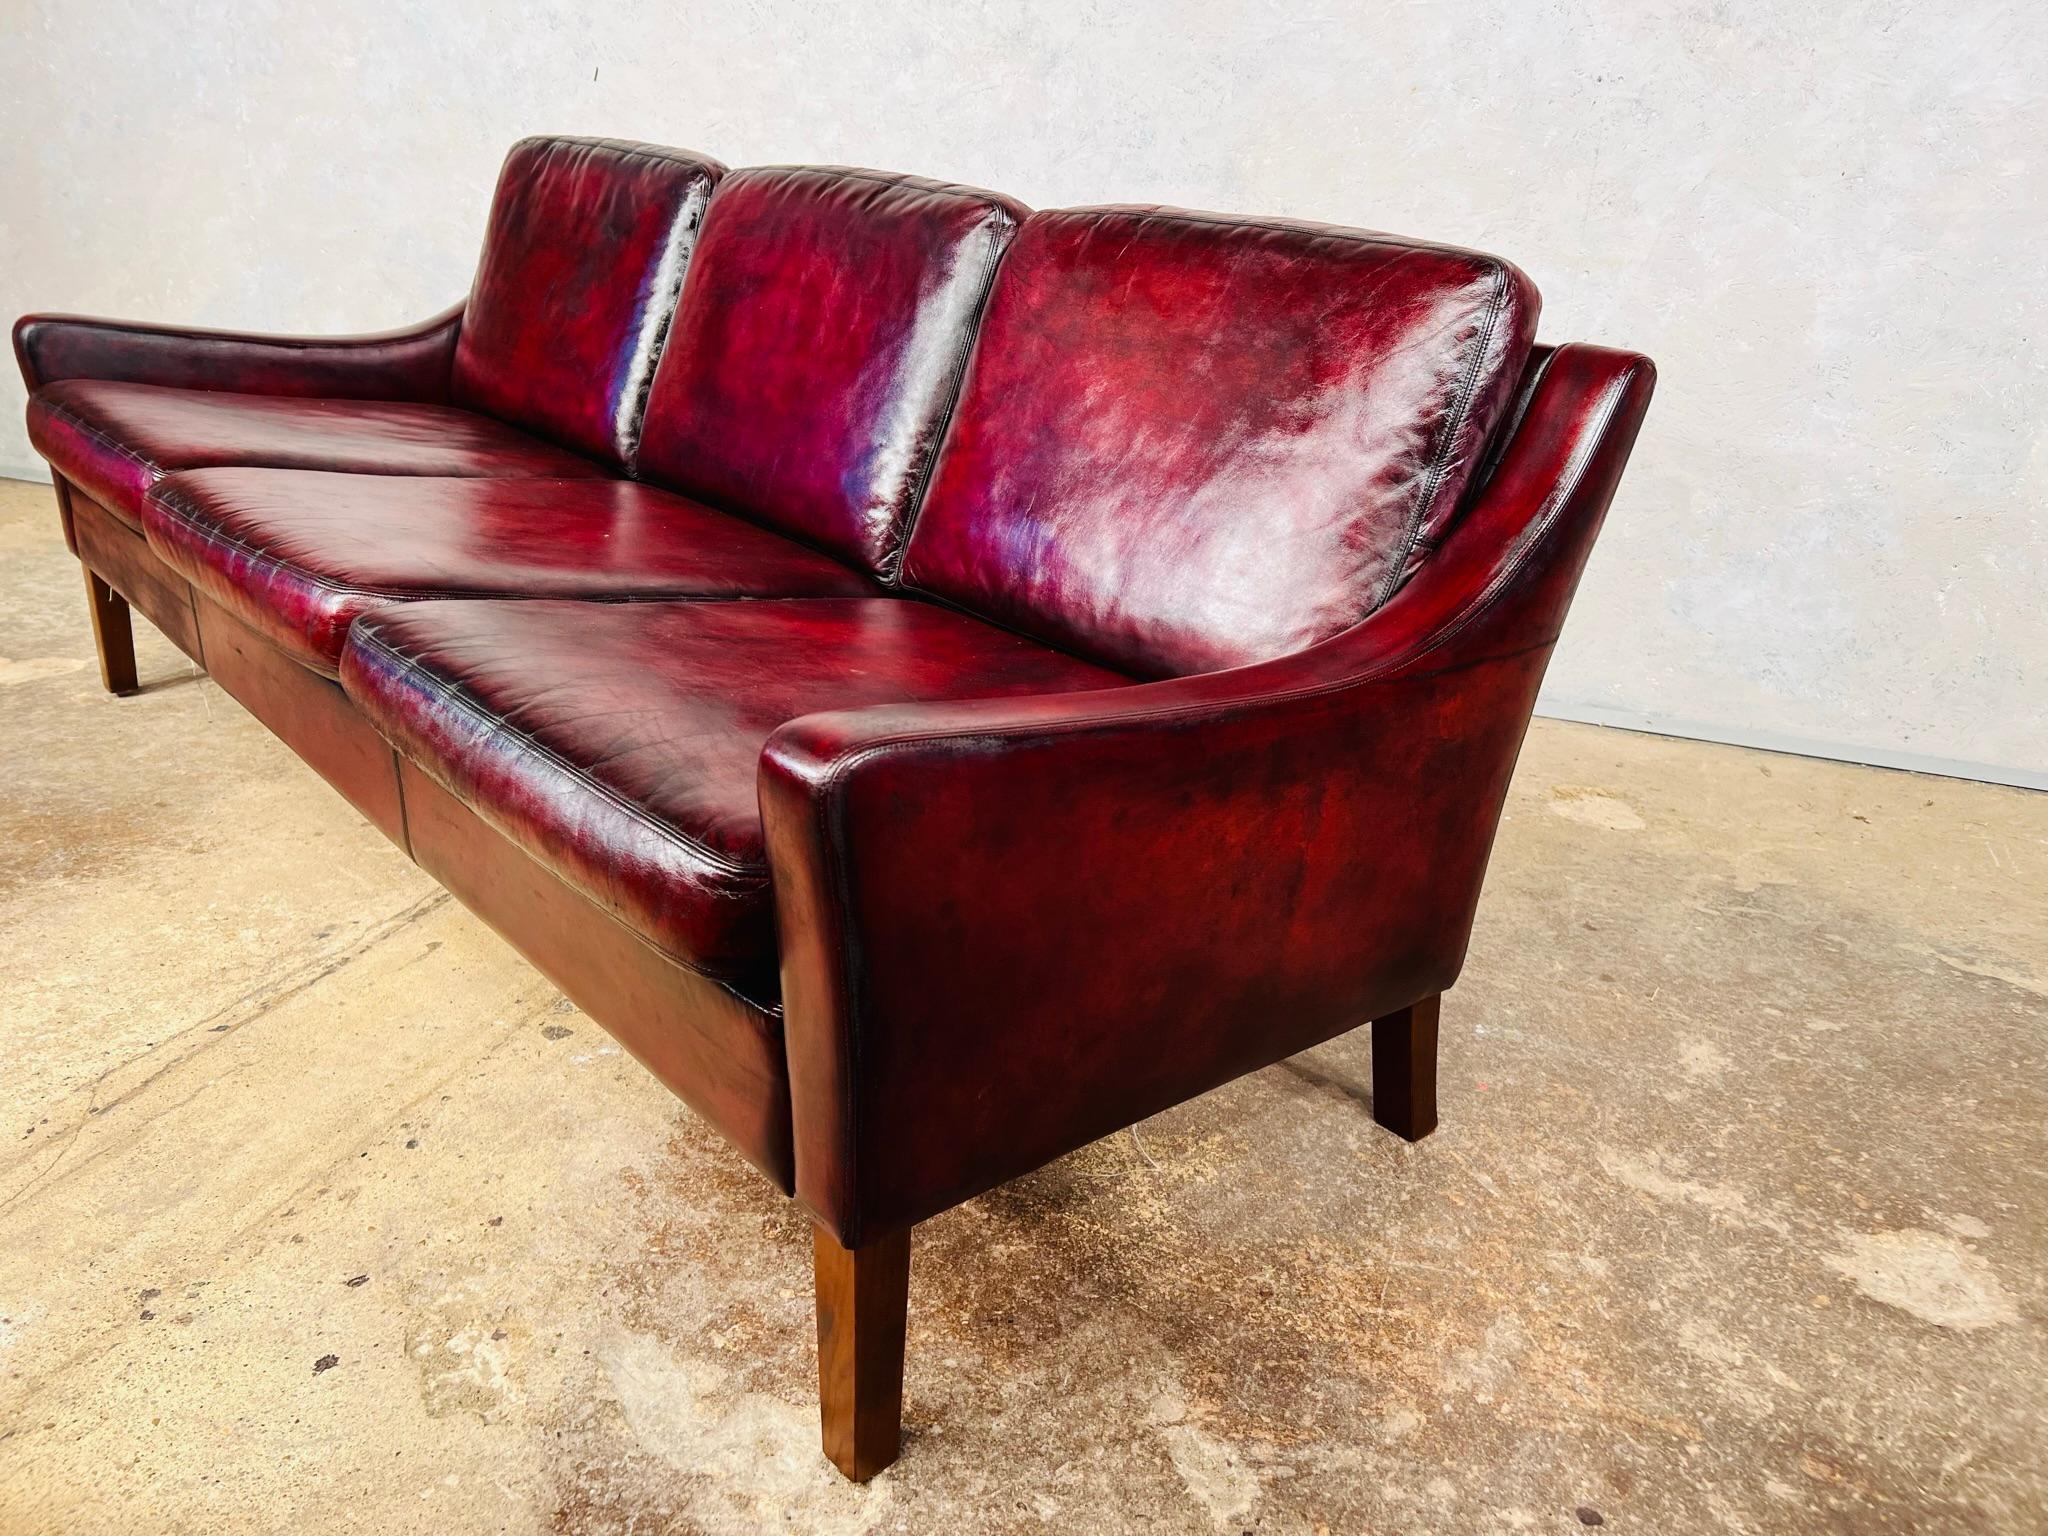 A Compact Vintage Danish 1970s Deep Red Three Seater Leather Sofa For Sale 4